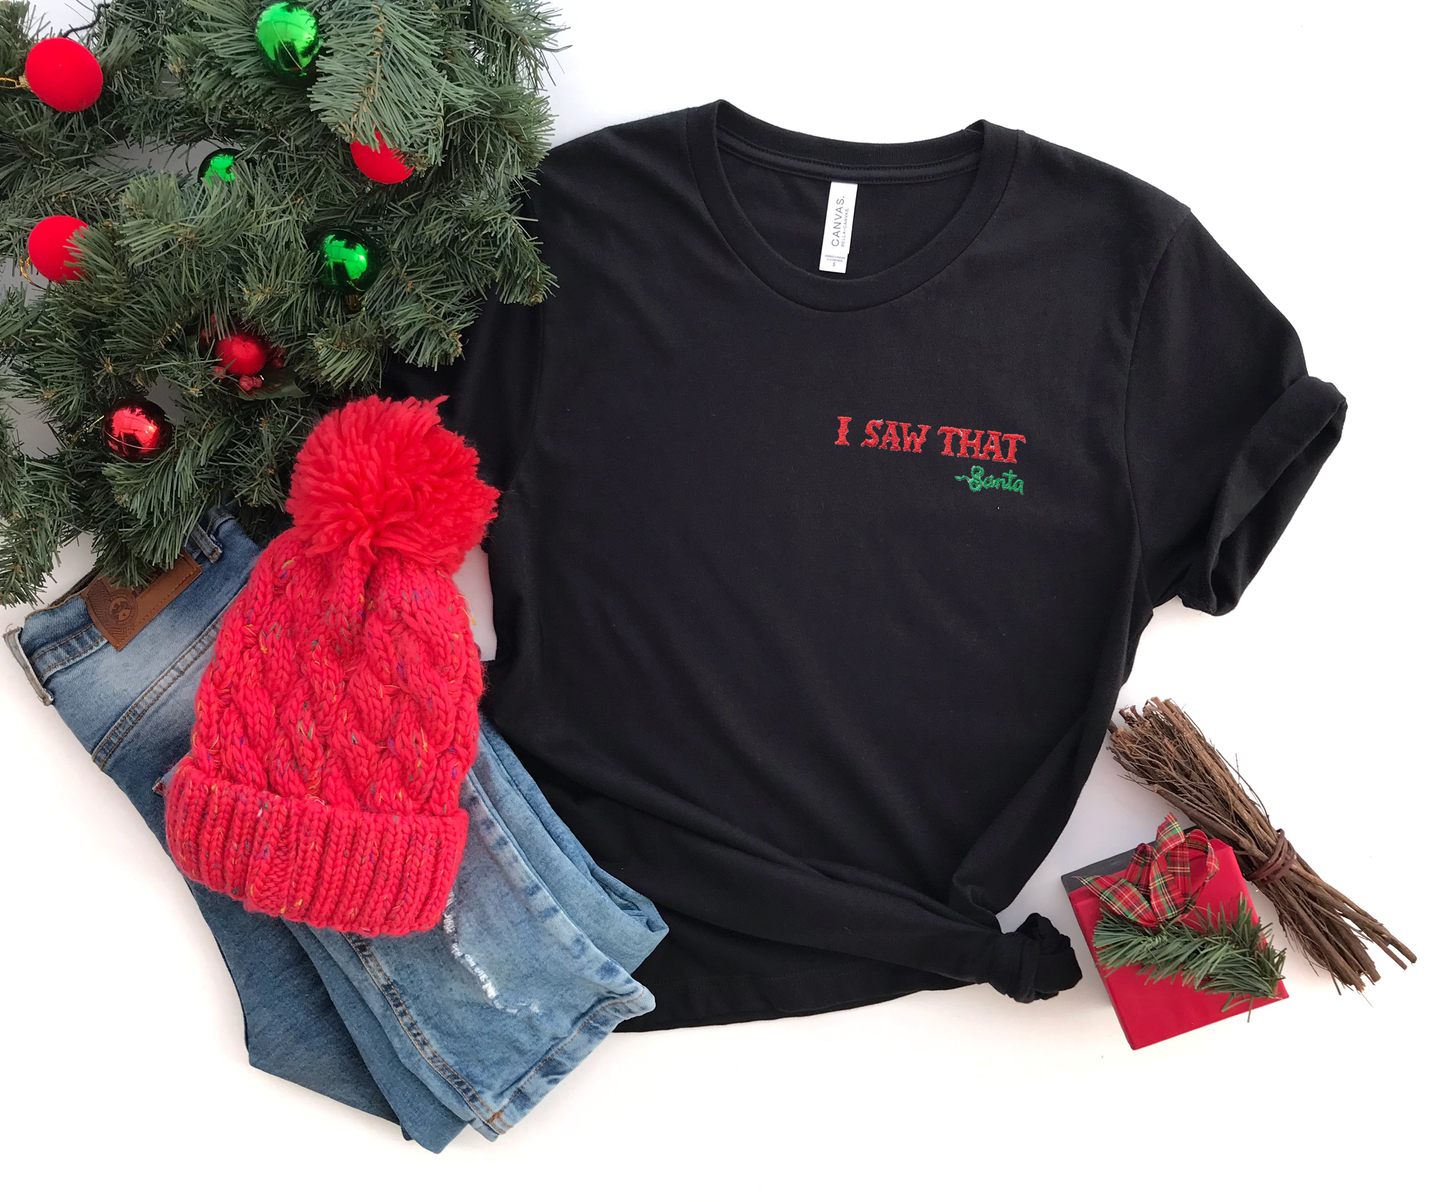 I Saw That Santa Quote Embroidered Adult Unisex Shirt